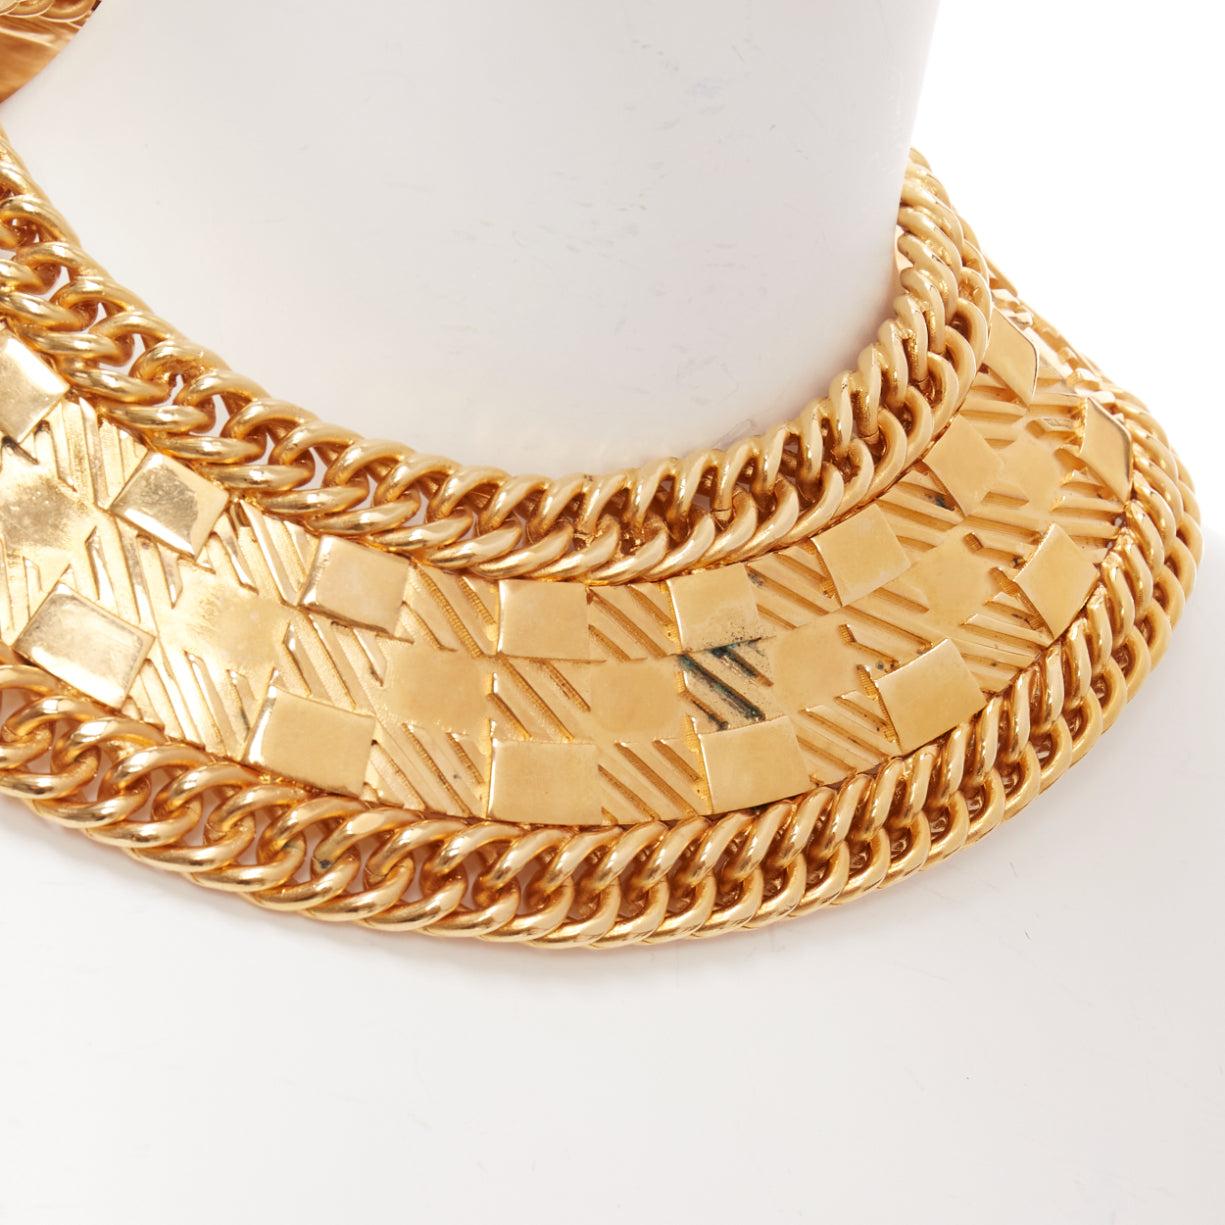 BALMAIN gold 3D checkered chain heavy metal choker plate necklace
Reference: AAWC/A01258
Brand: Balmain
Designer: Olivier Rousteing
Material: Metal
Color: Gold
Pattern: Solid
Lining: Gold Metal

CONDITION:
Condition: Good, this item was pre-owned